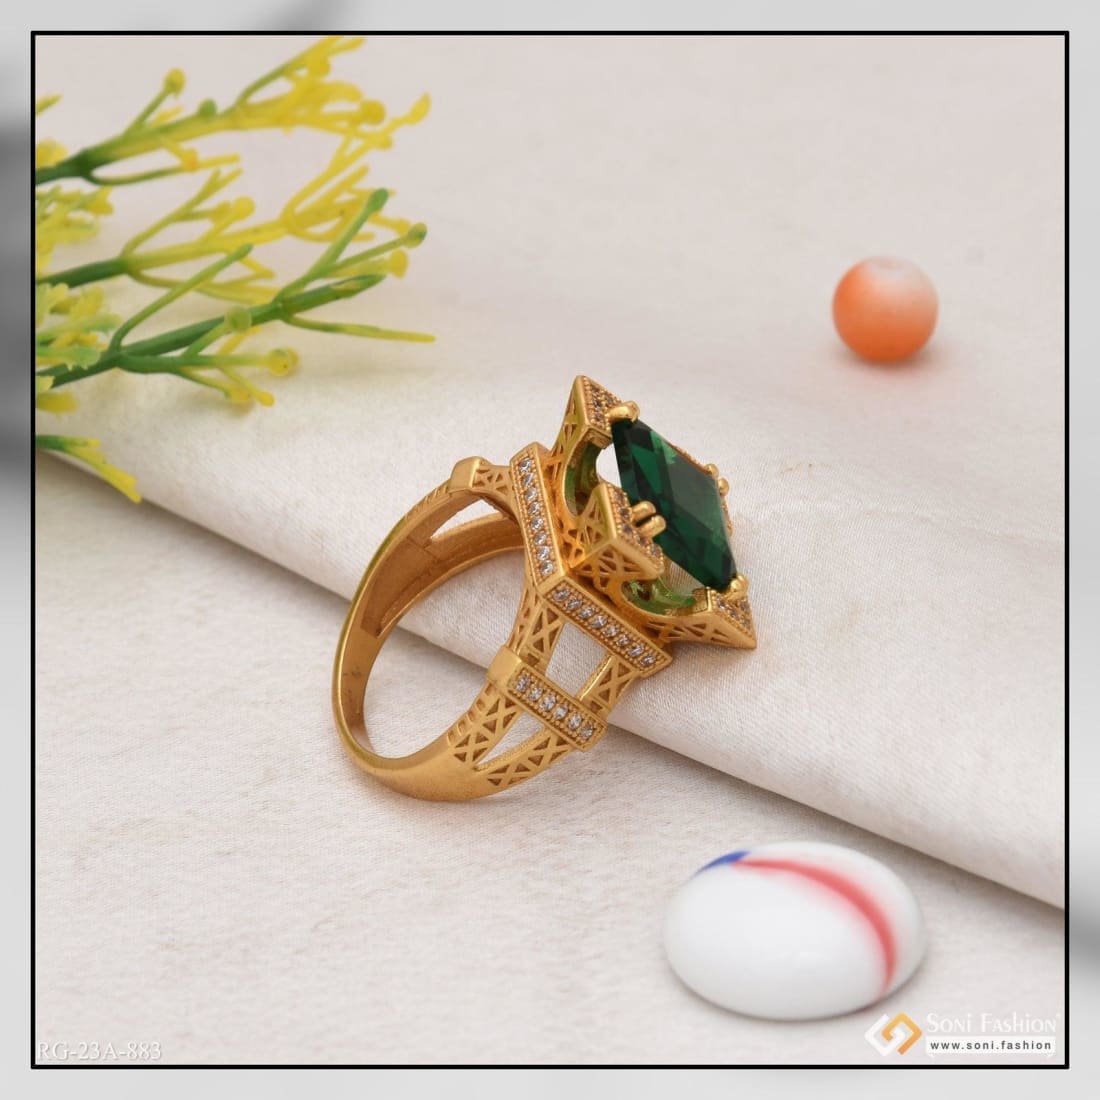 Buy 22Kt Gold Semi Precious Green Stone Ring For Men 94VH3259 Online from  Vaibhav Jewellers